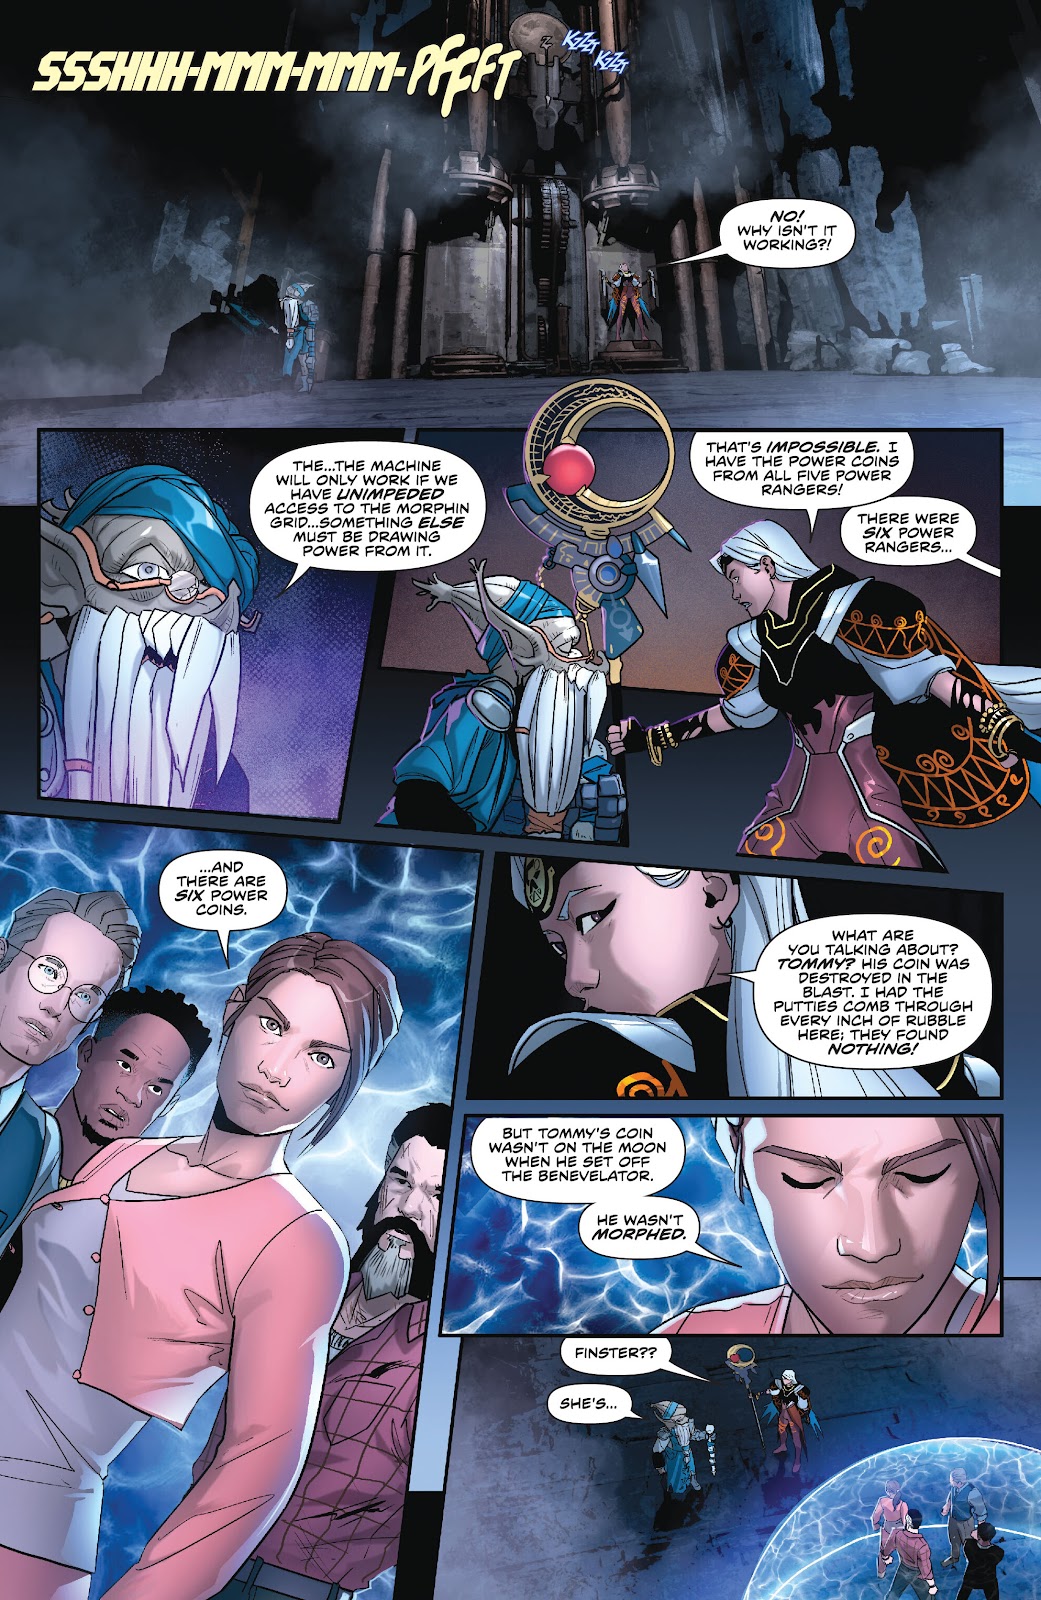 Mighty Morphin Power Rangers: The Return issue 3 - Page 19